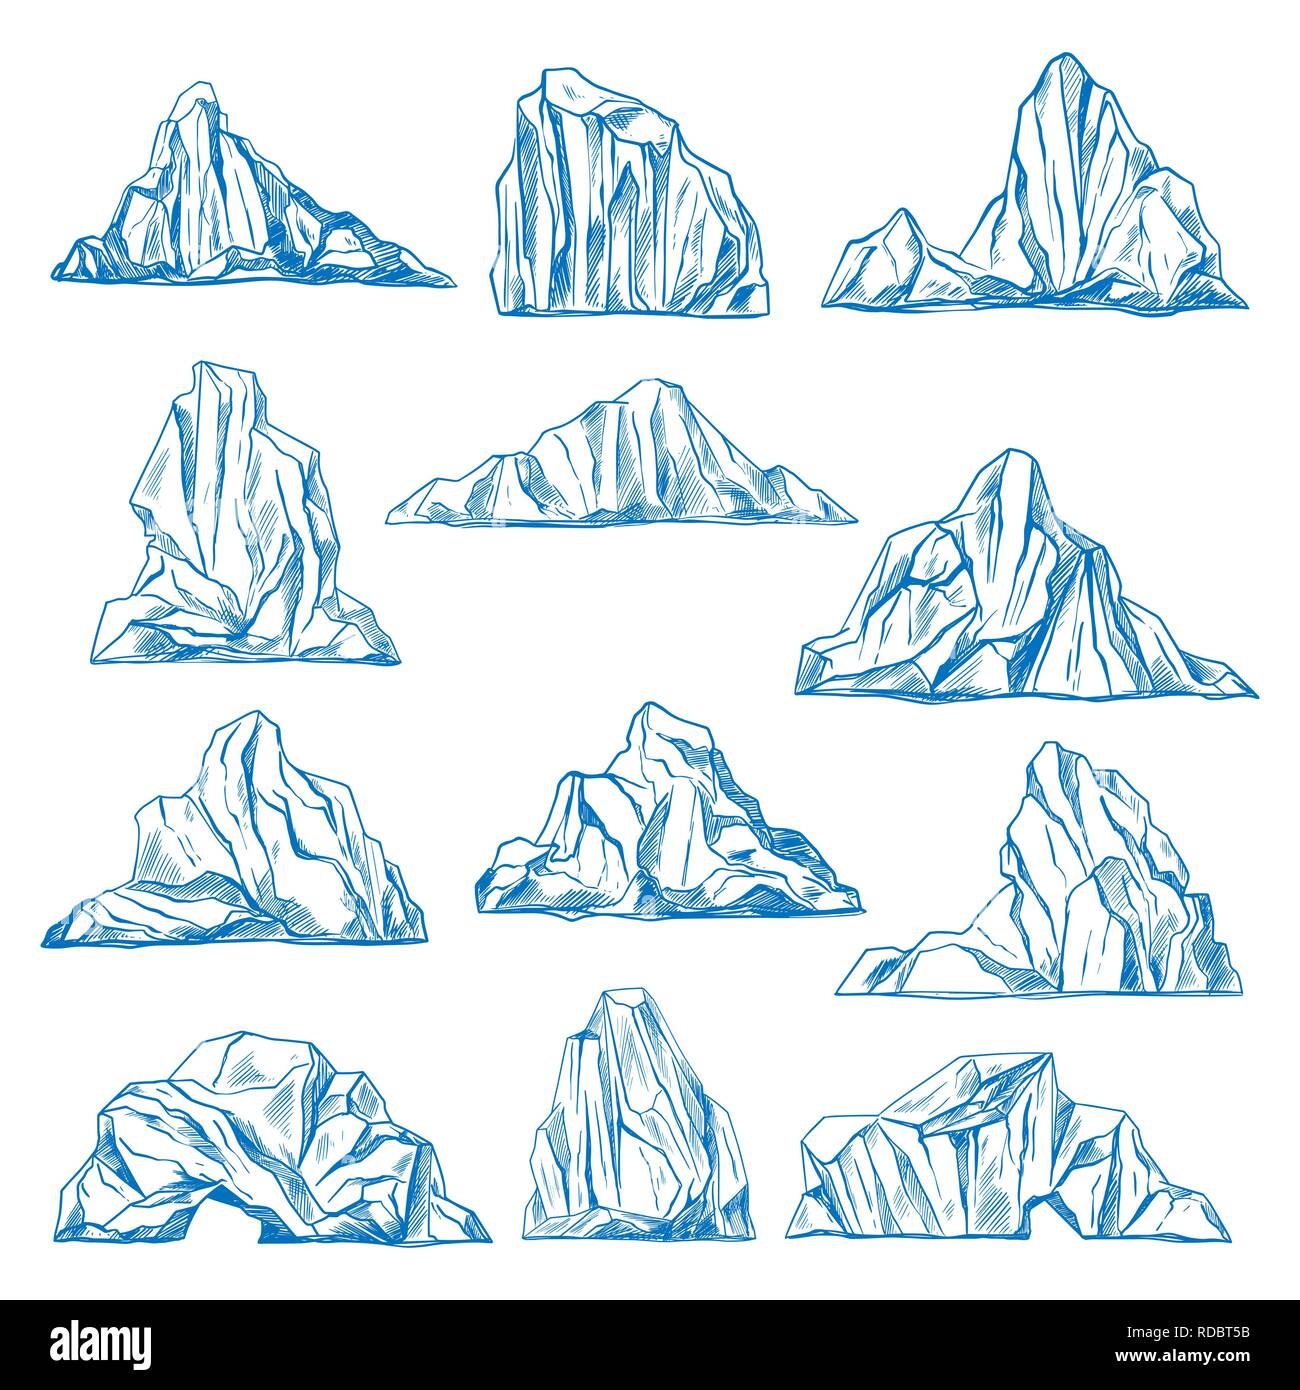 Icebergs sketch or hand drawn mountains. Stock Vector